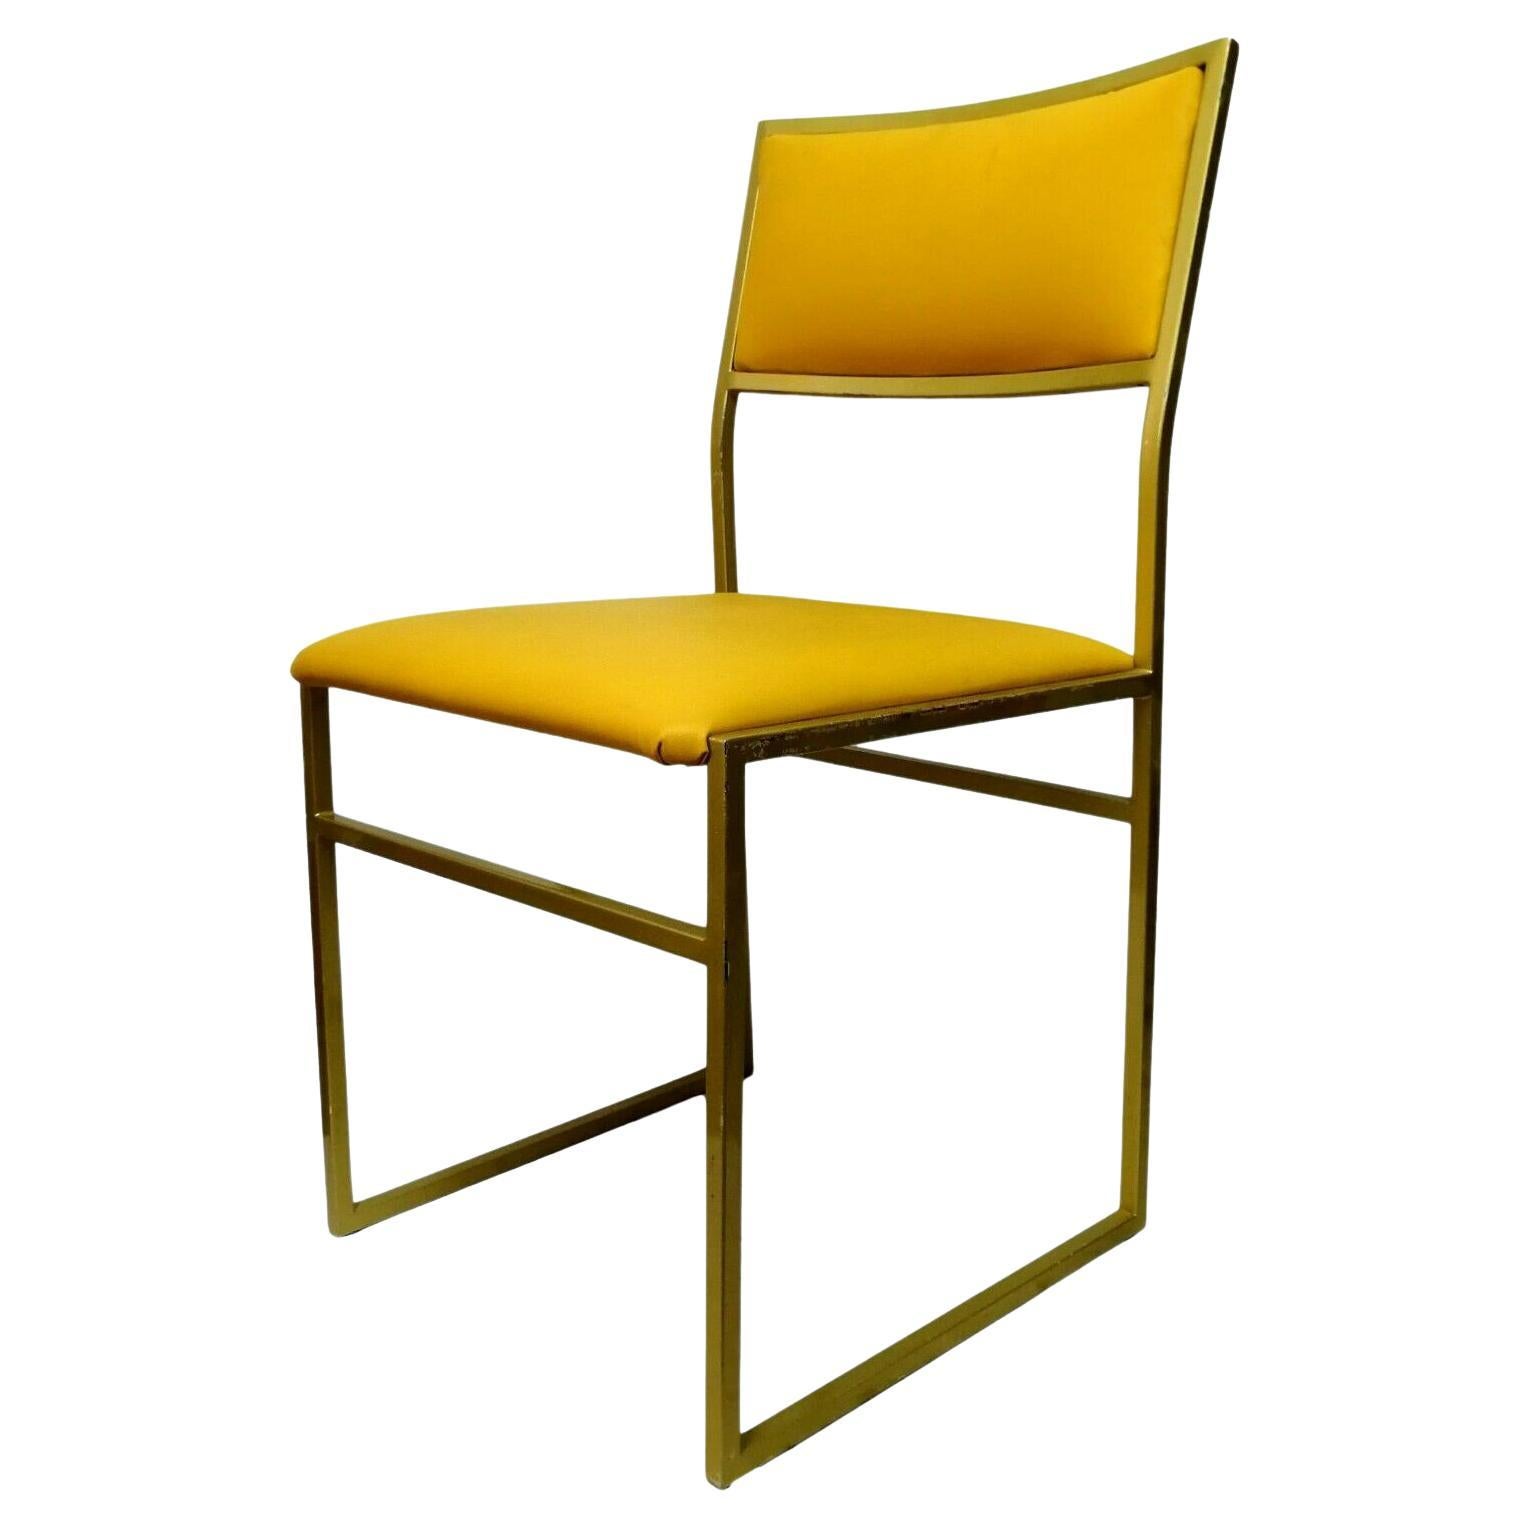 Collectible Chair in Gold Metal and Yellow Upholstery, 1970s